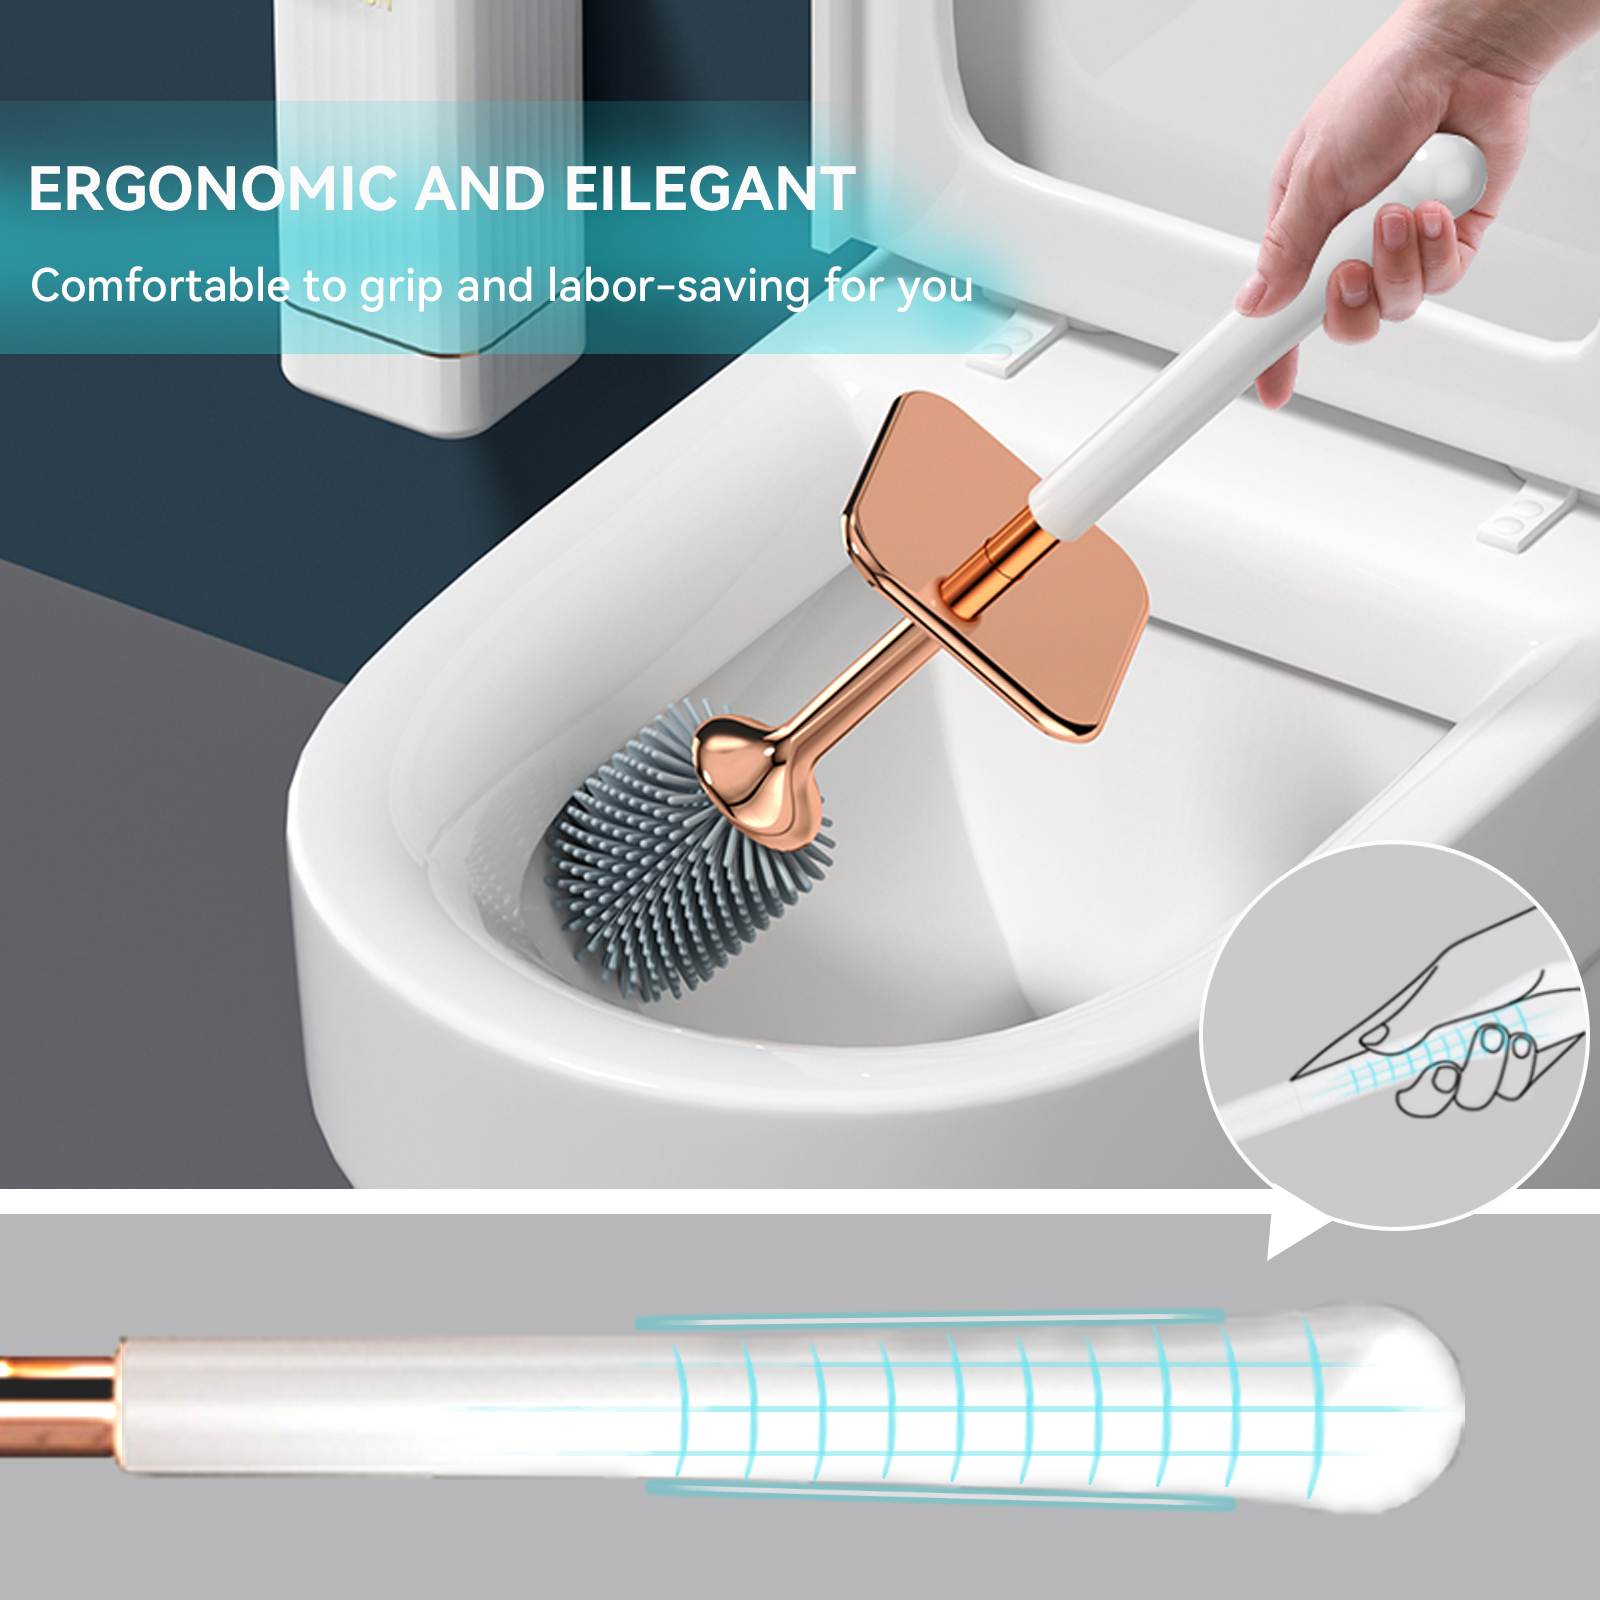 Upgraded Silicone Toilet Brushes with Soft Bathroom Cleaning